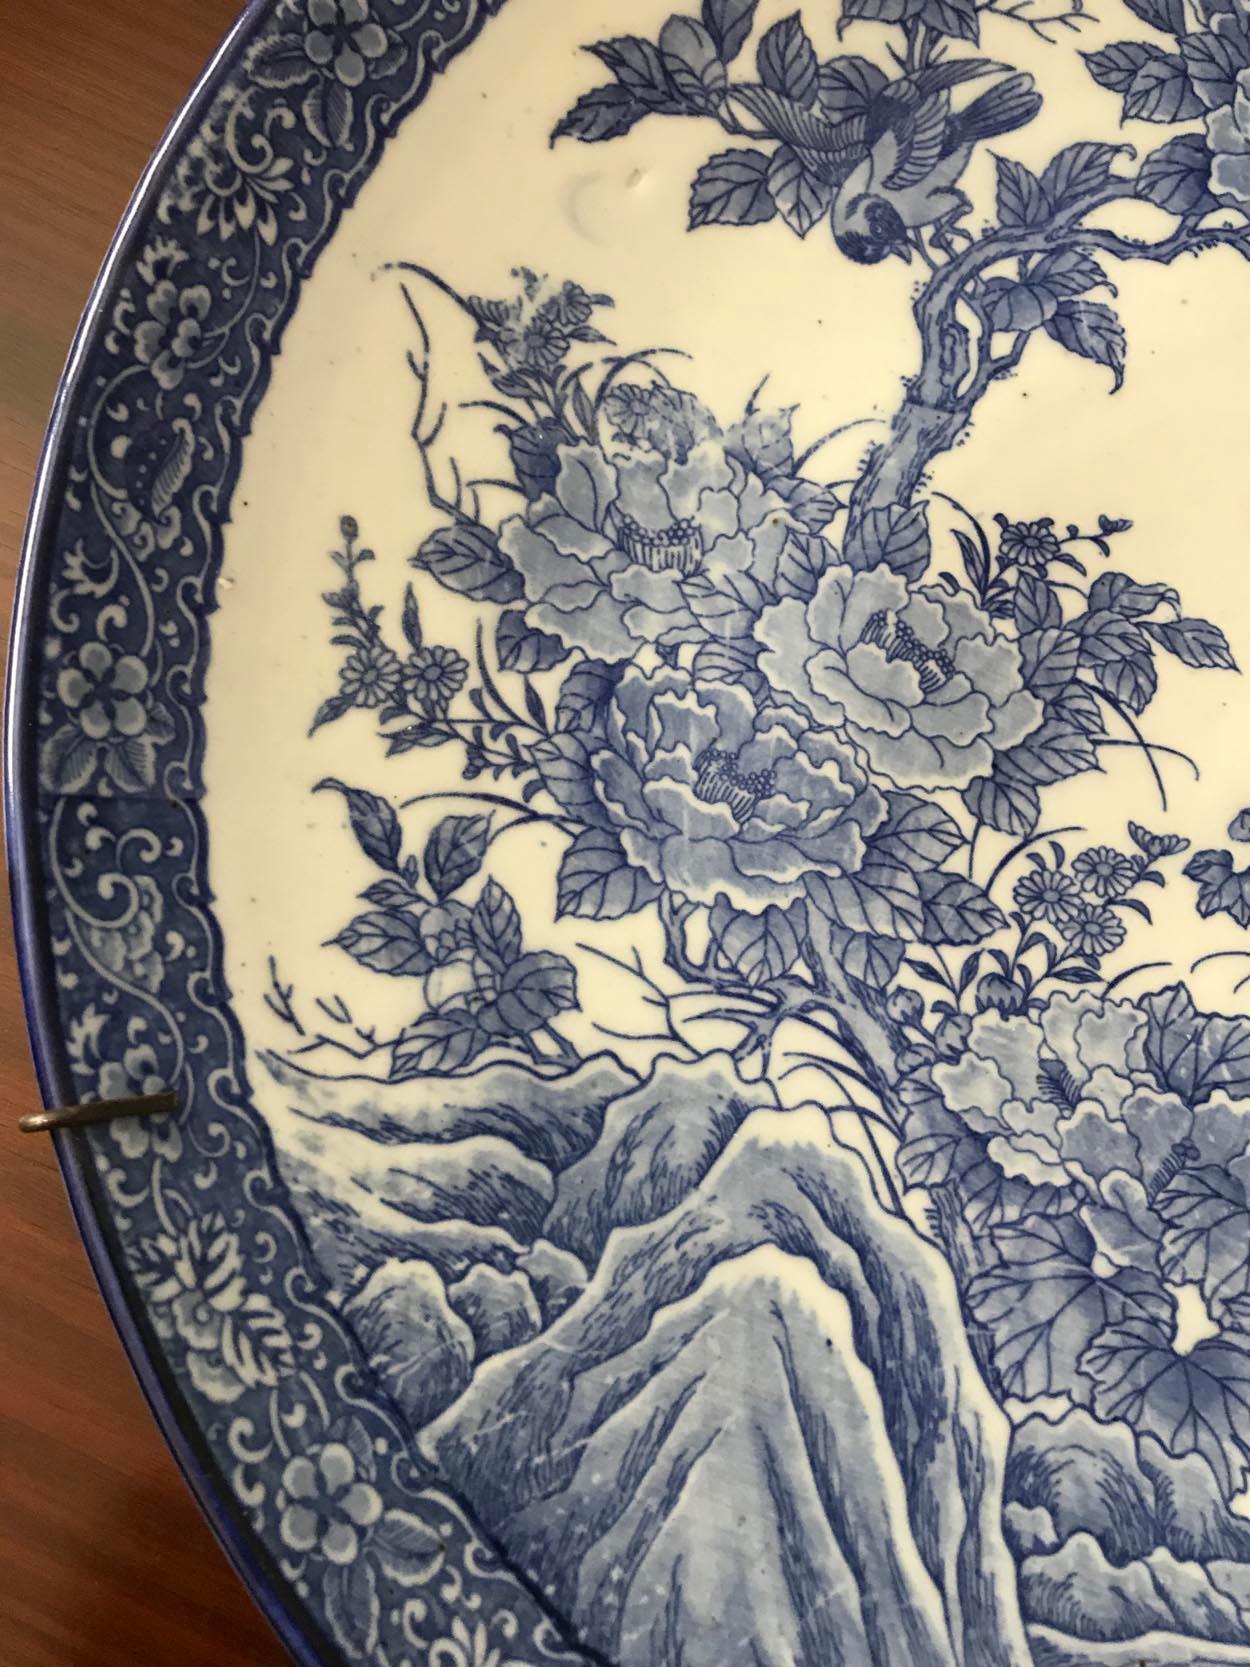 Hand-Painted Japanese Blue and White Ceramic Charger, circa 1880